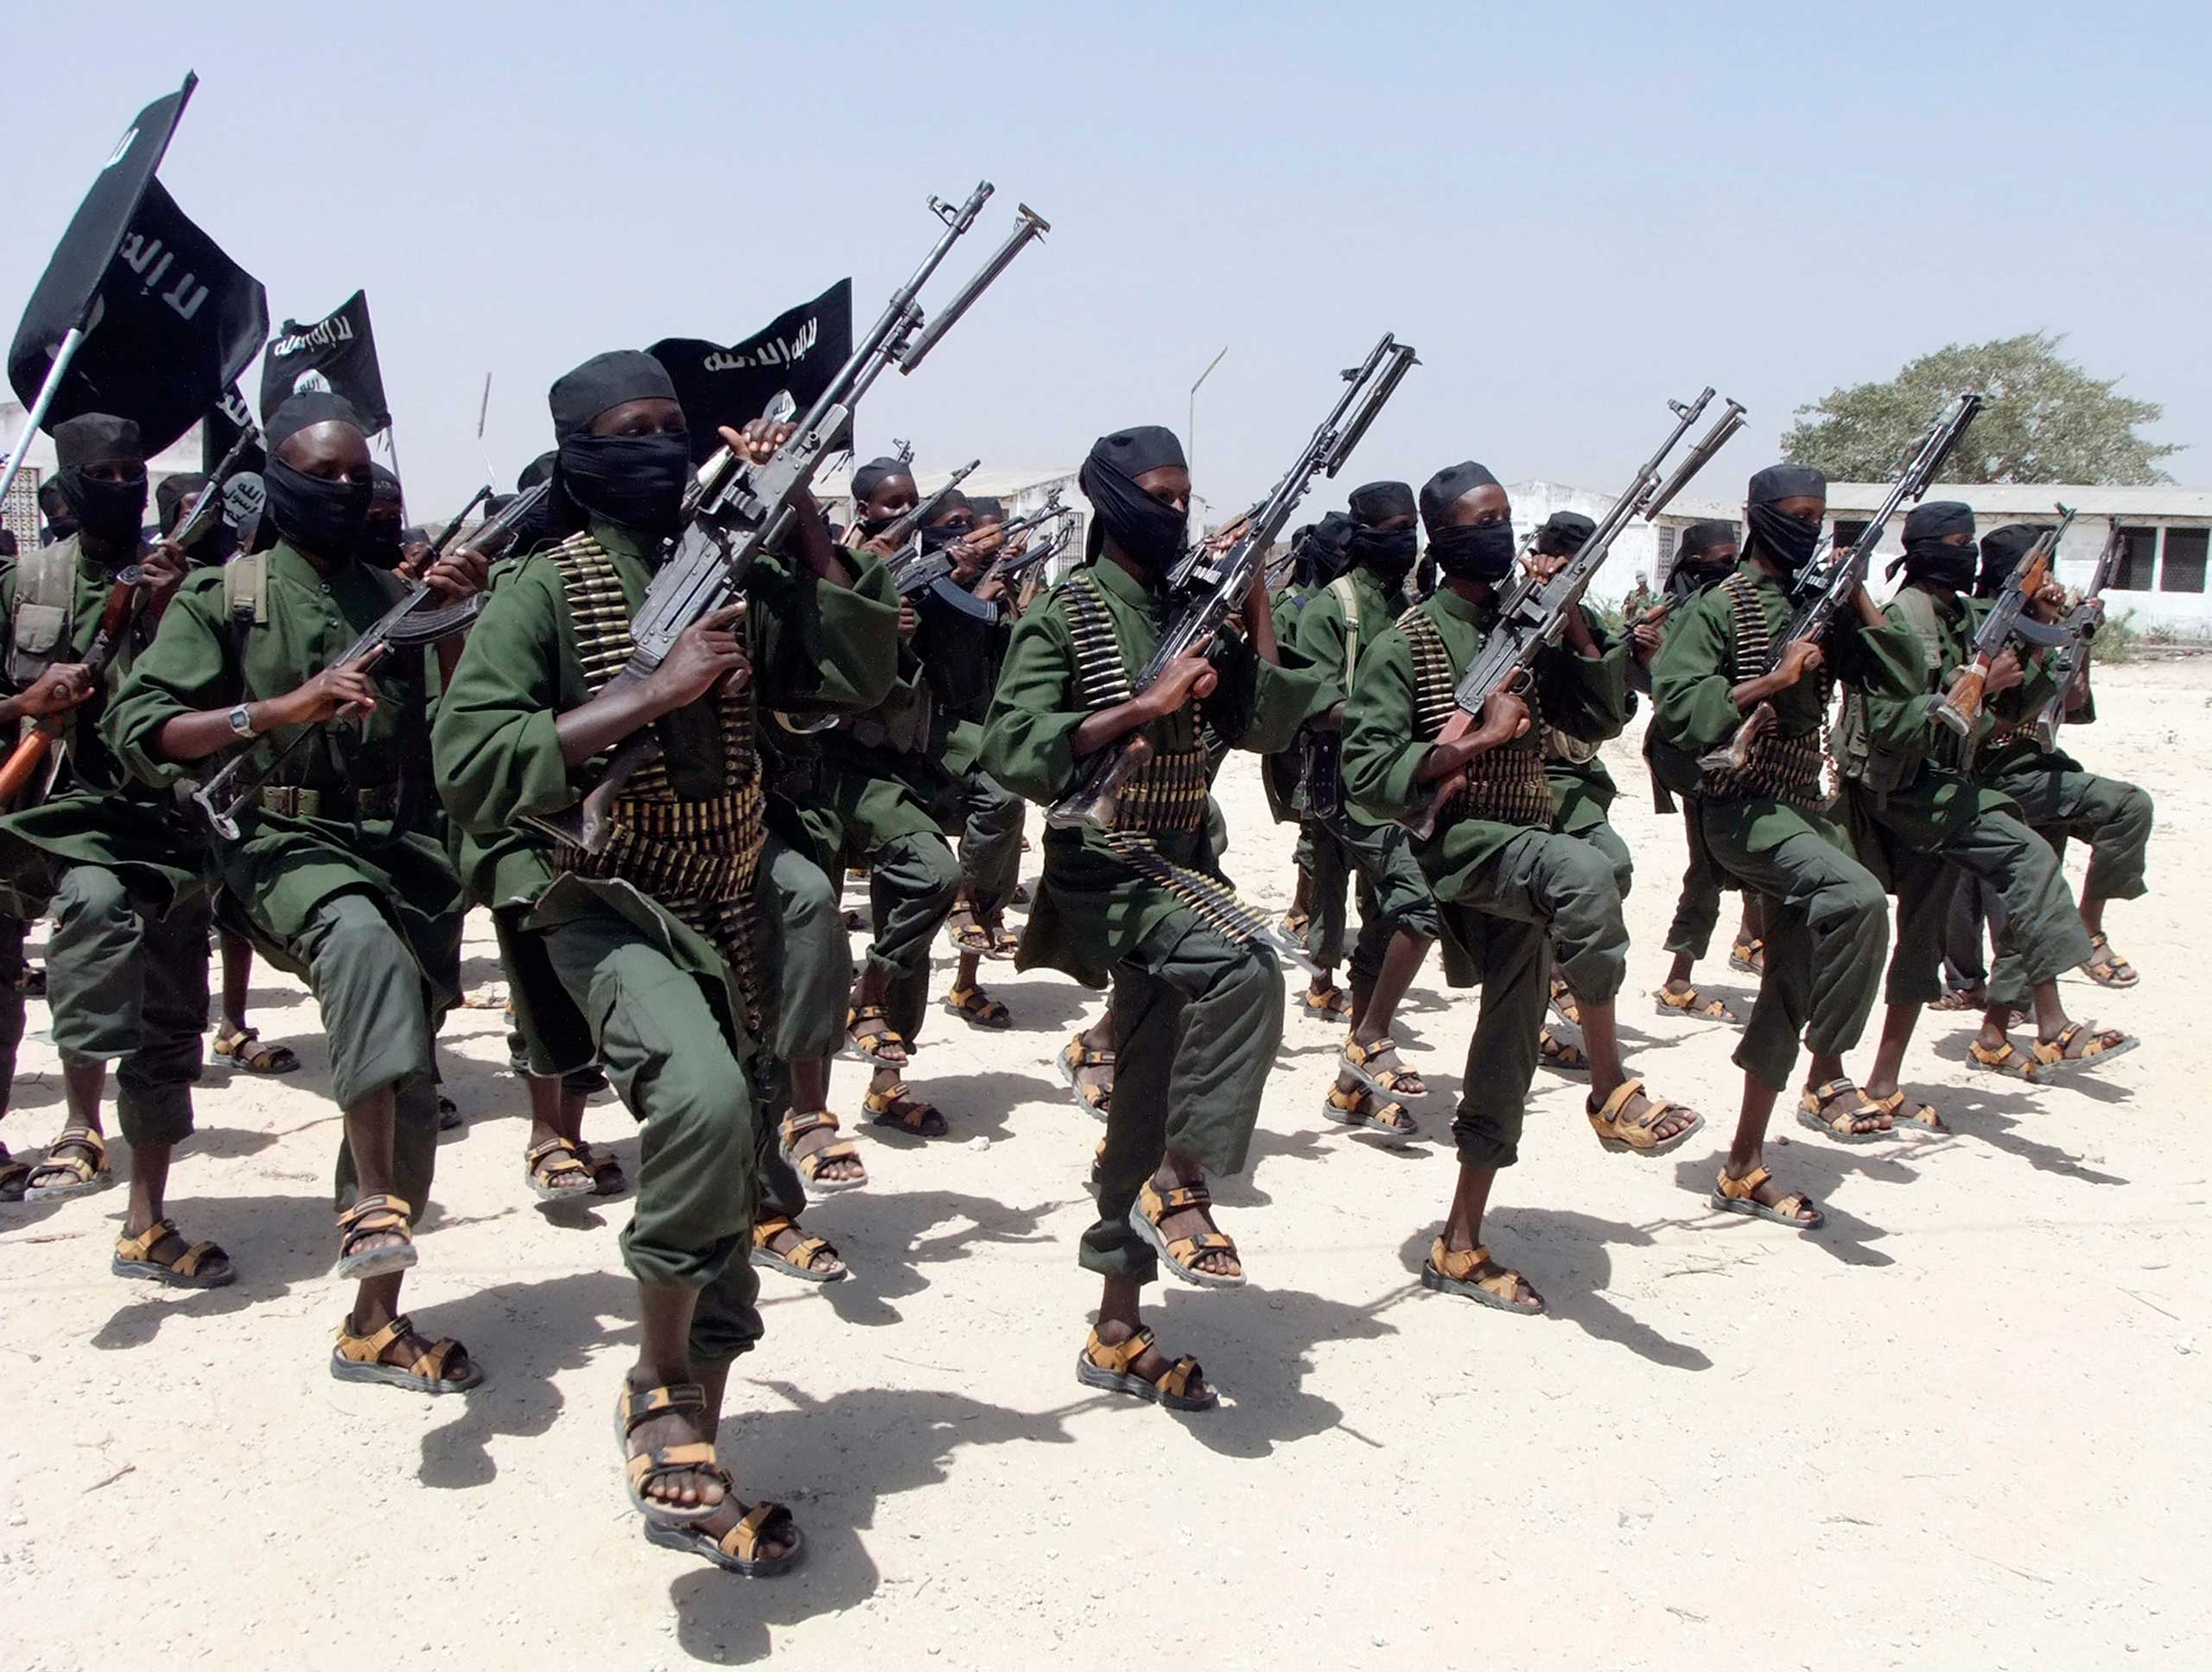 In this Thursday, Feb. 17, 2011 file photo, hundreds of newly trained al-Shabab fighters perform military exercises in the Lafofe area some 18km south of Mogadishu, in Somalia. A Somali intelligence official says Zakariya Ismail Ahmed Hersi, a leader with the Islamic extremist group al-Shabab who has a $3 million bounty on his head, has surrendered to police in Somalia. (Farah Abdi Warsameh—AP)